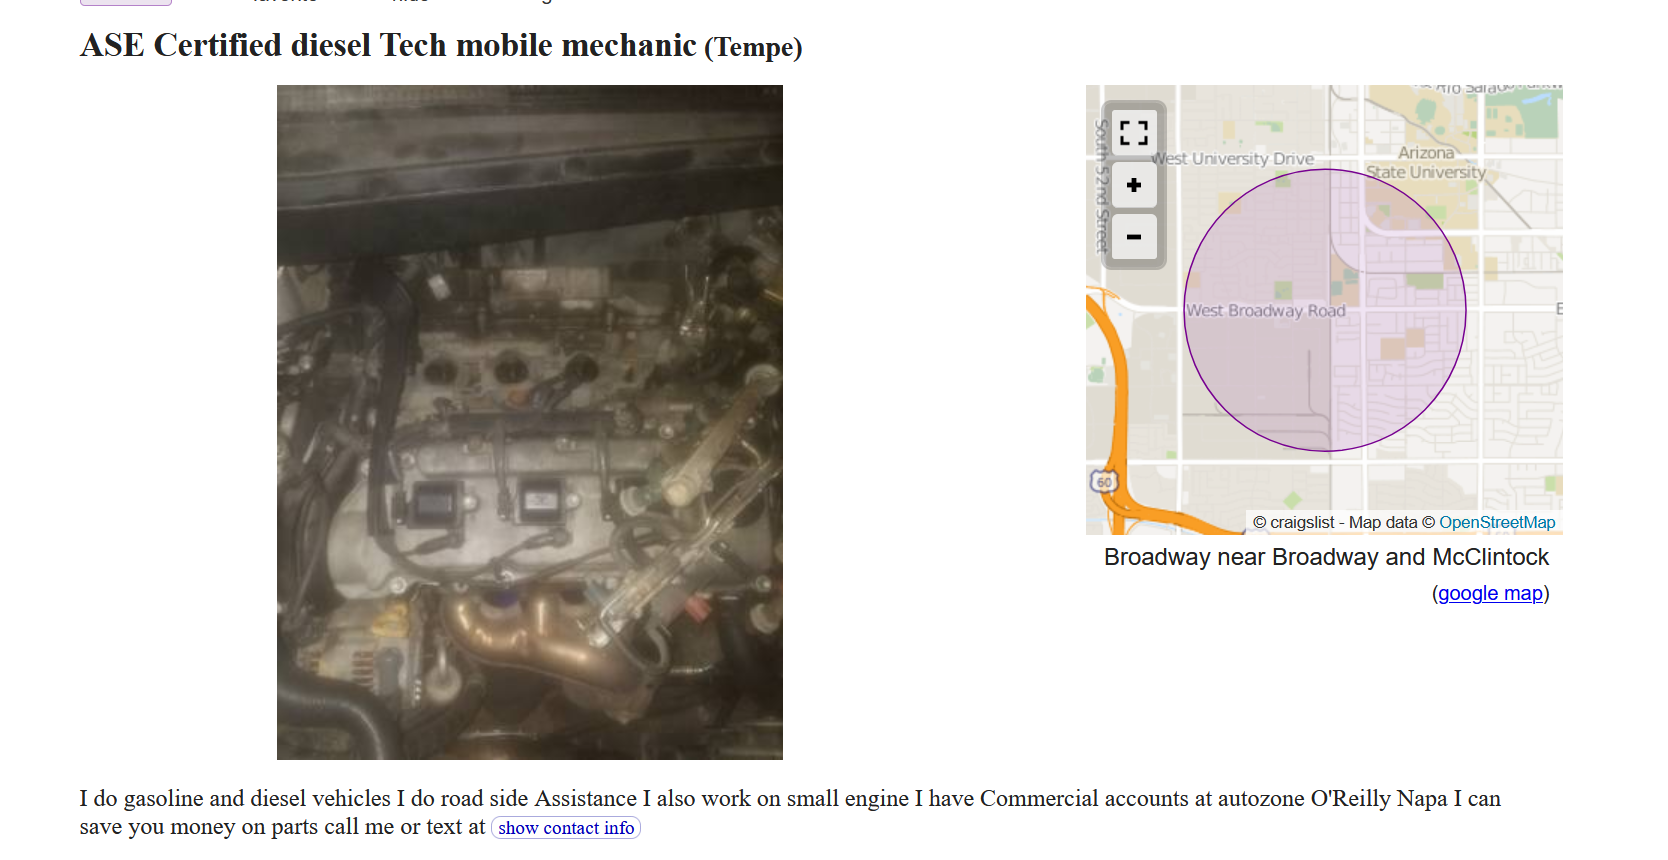 Craigslist Ad removed by poster